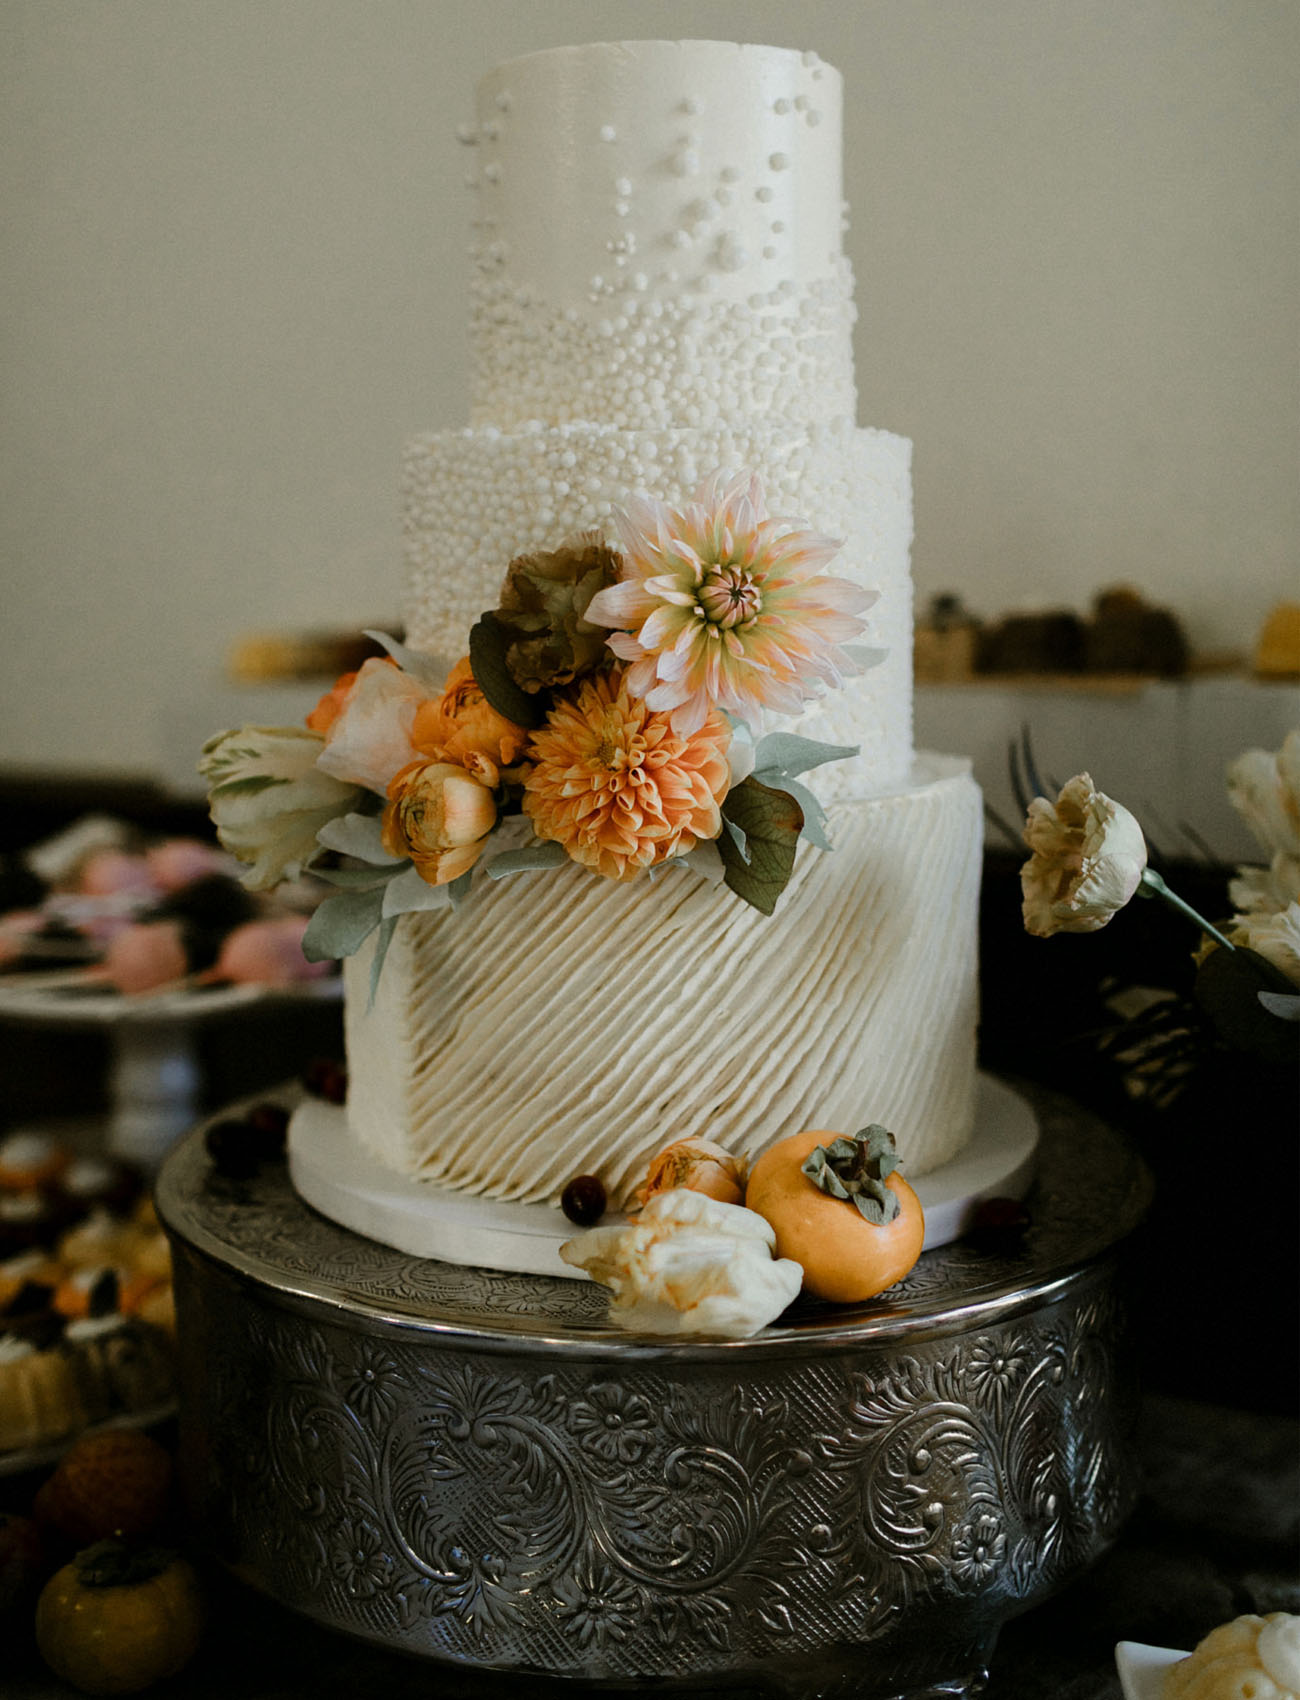 The wedding cake was perfectly styled with fresh blooms and textural touches and matched the wedding like no other